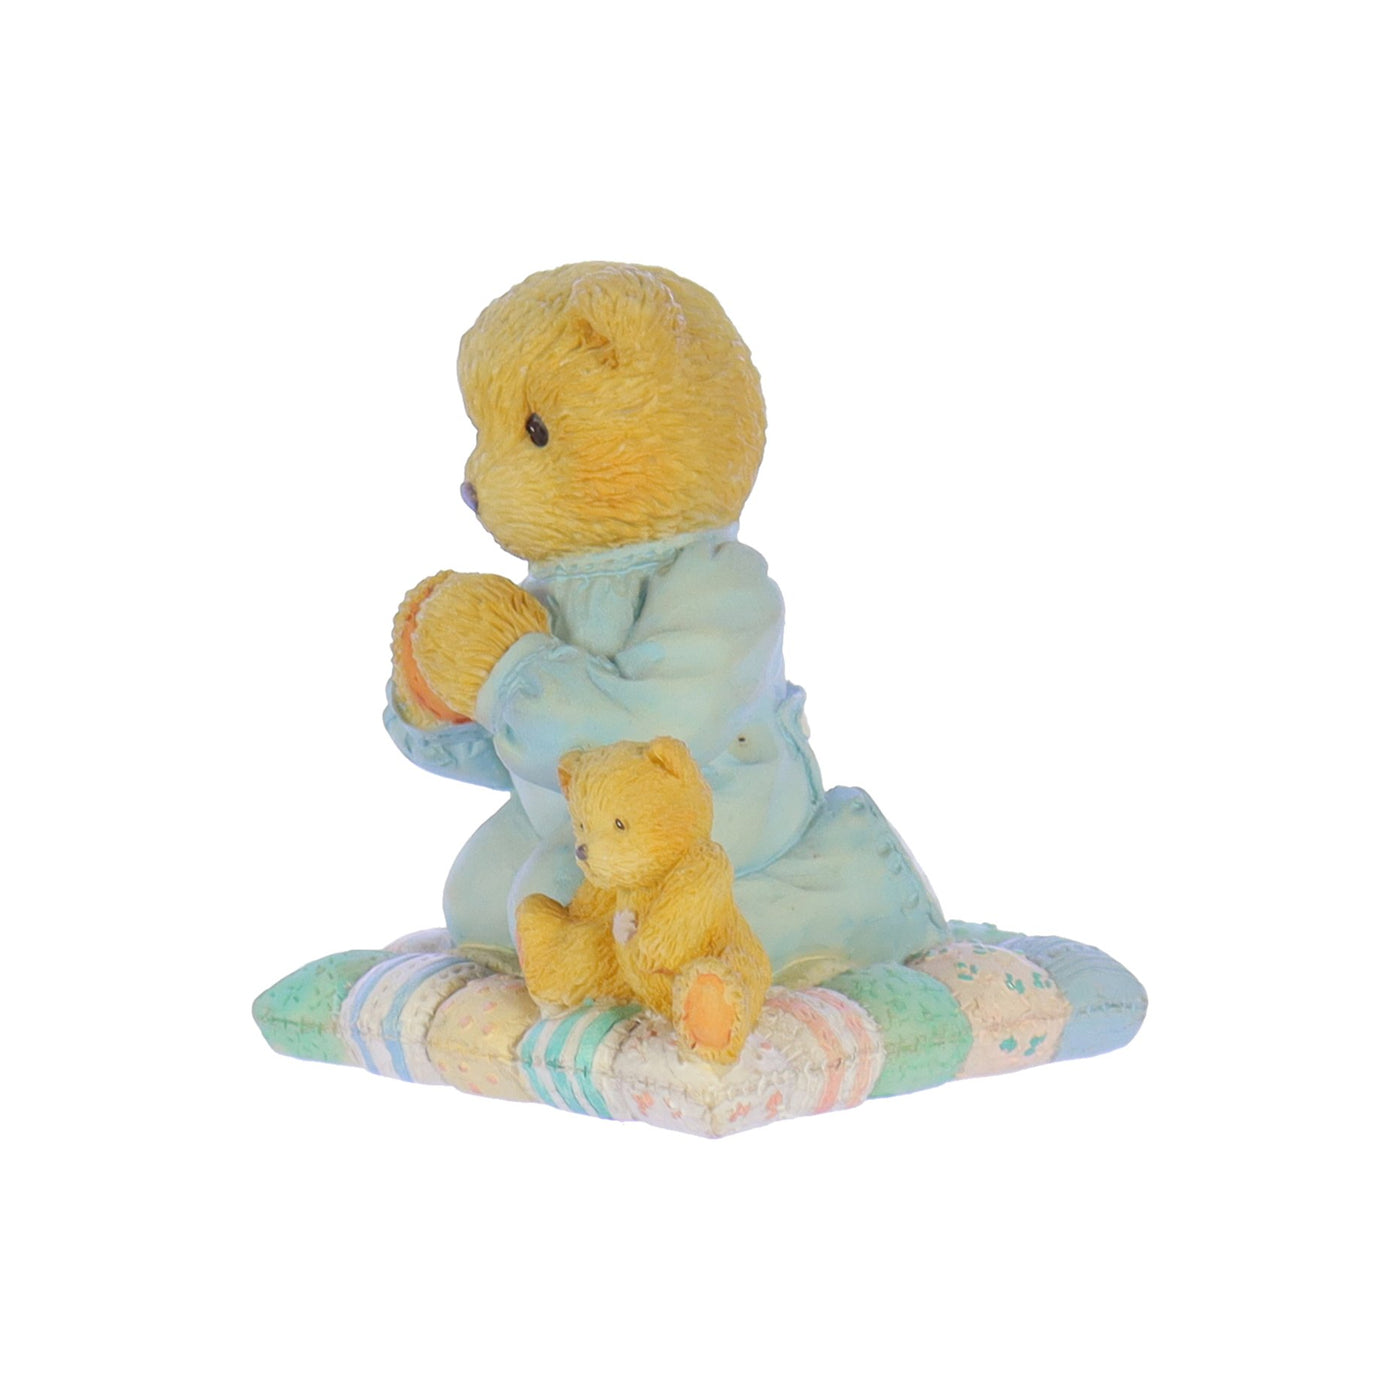 Cherished Teddies by Priscilla Hillman Resin Figurine Patrick Thank You For A Friend That's True_